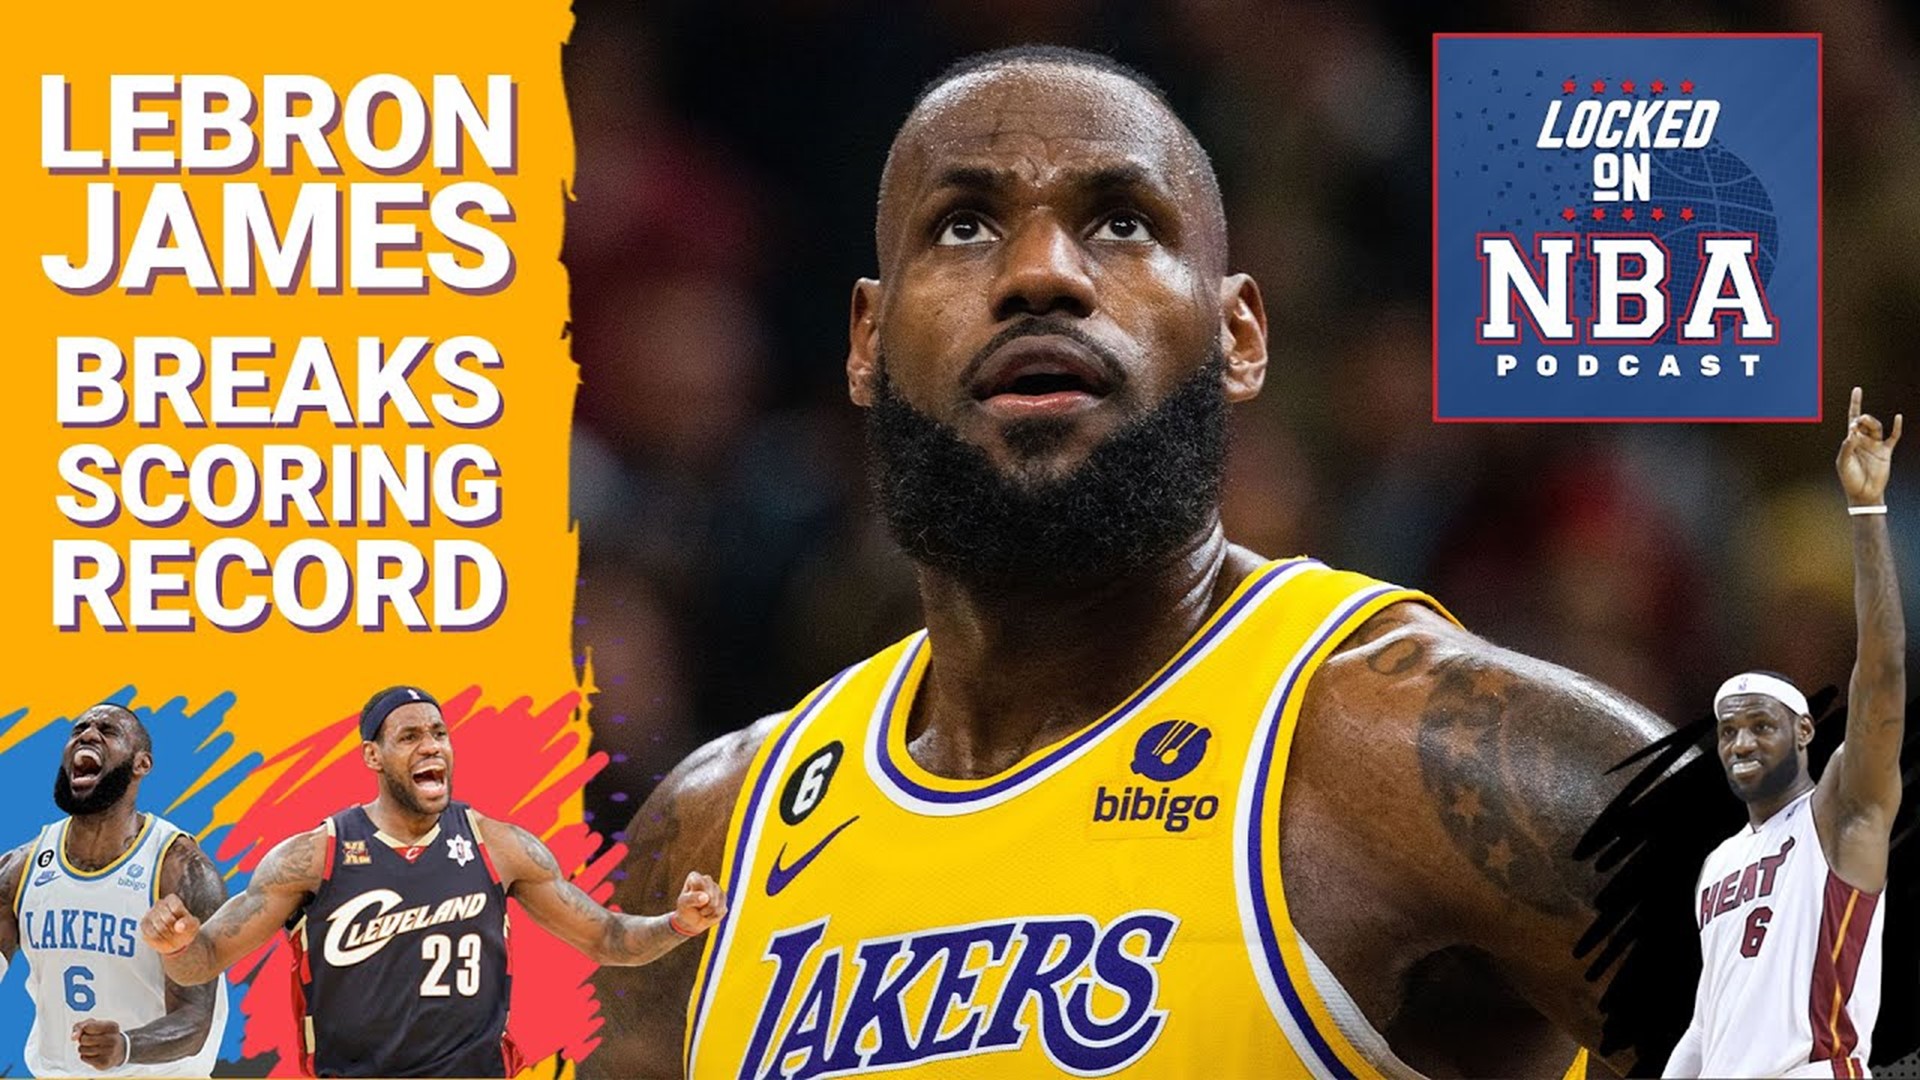 How LeBron James Broke NBA Scoring Record & What He Means to the NBA. NBA Roundtable Reaction